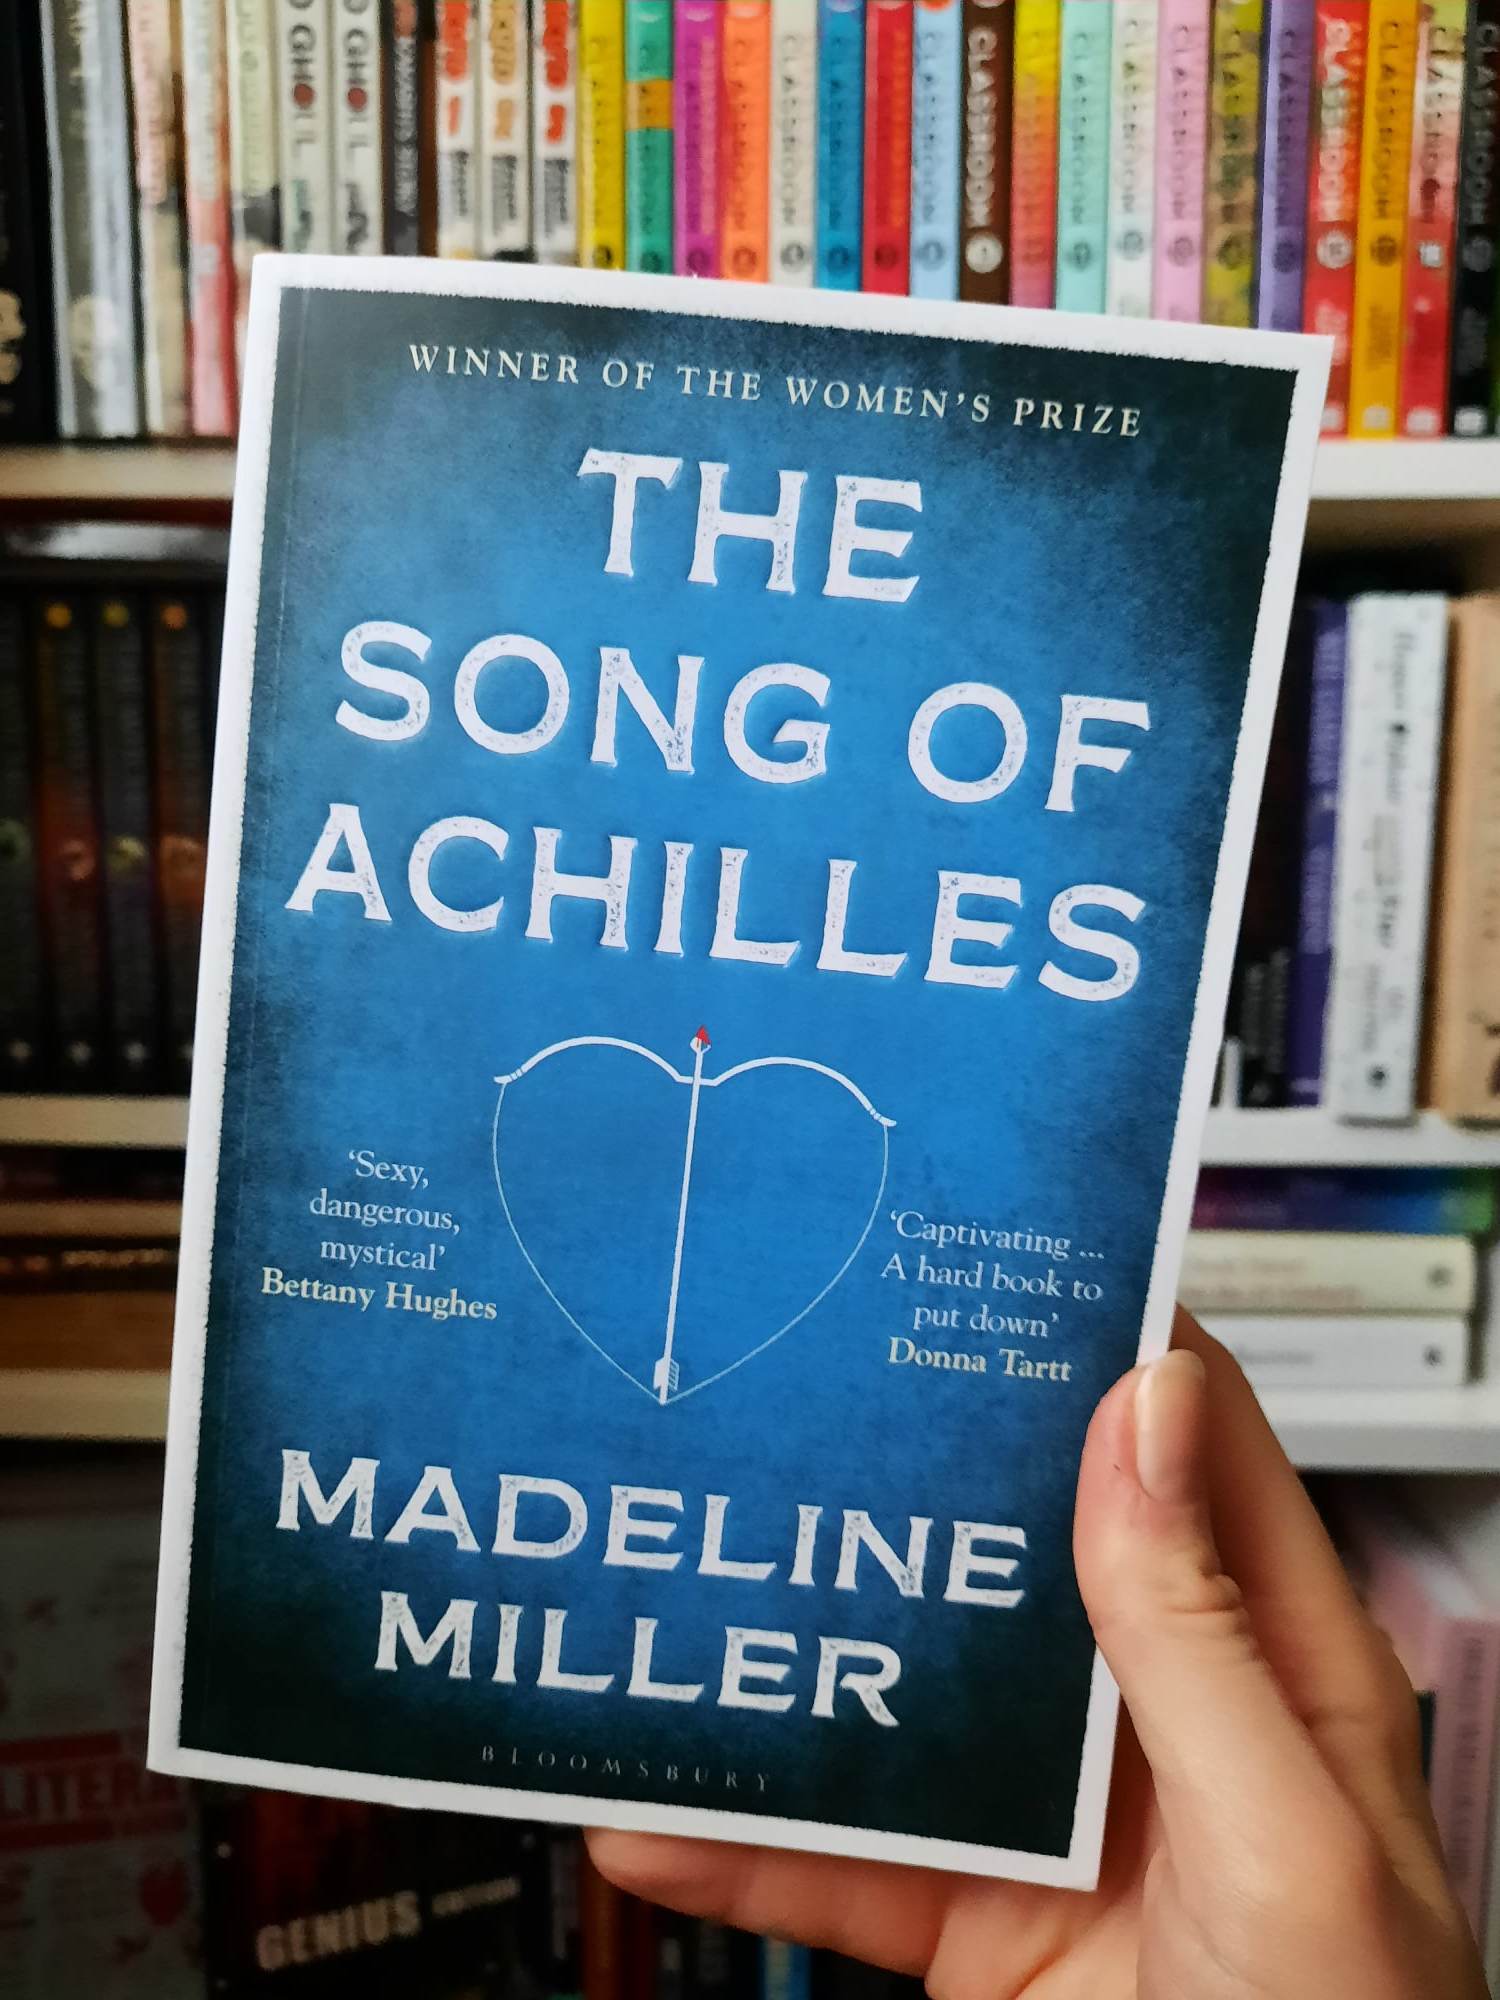 Book cover - The Song of Achilles by Madeline Miller